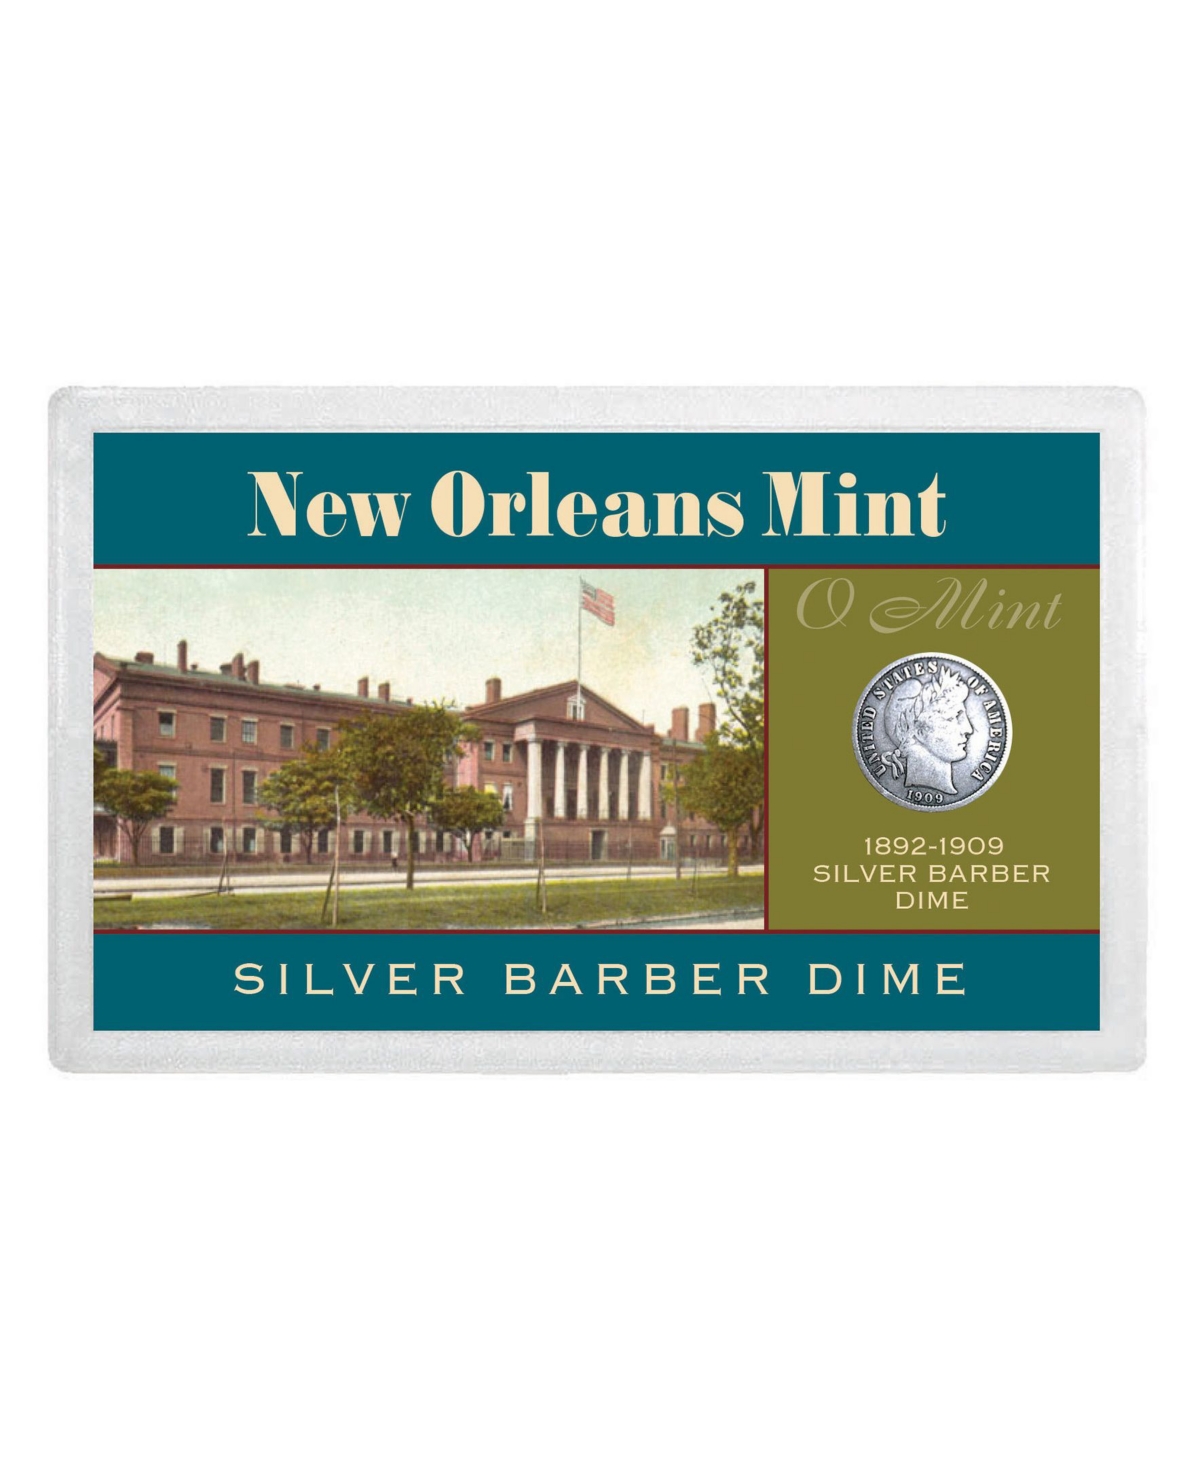 American Coin Treasures New Orleans Mint Silver Barber Dime Over 100-Years Old